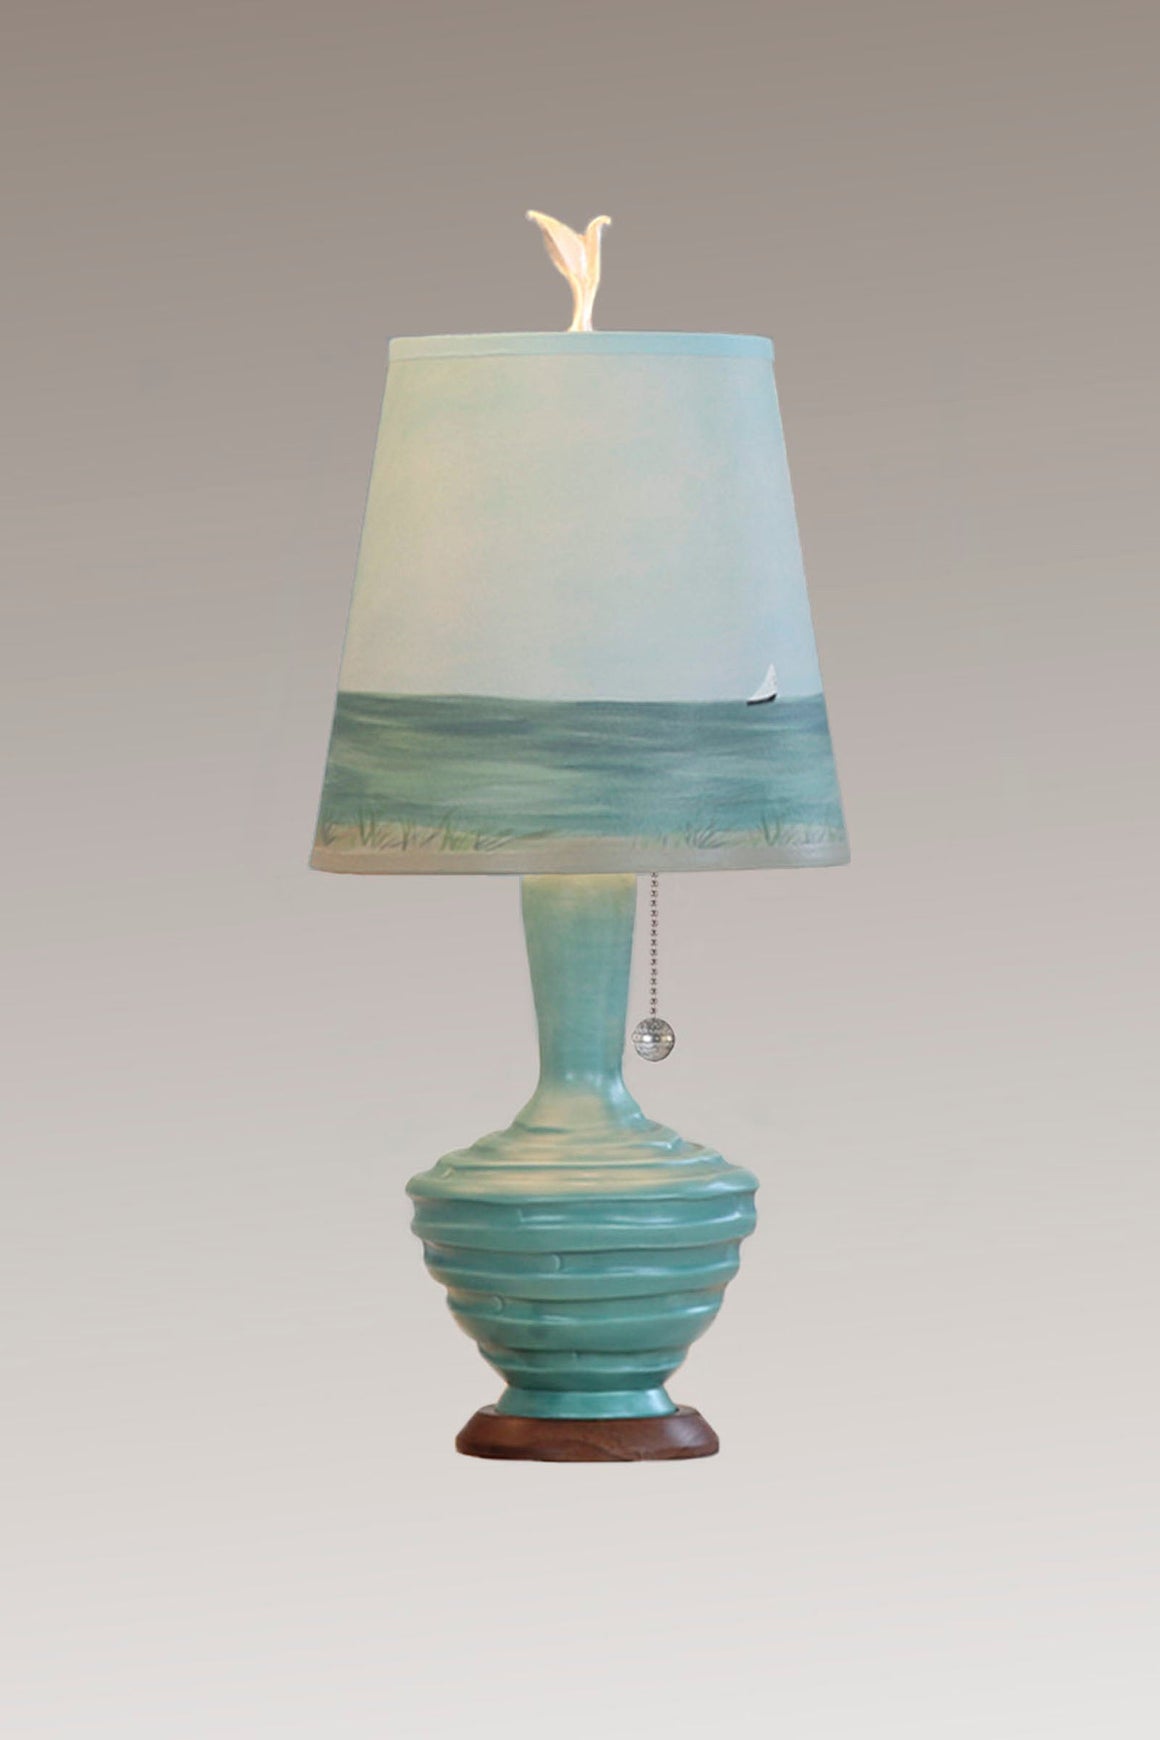 Ceramic Table Lamp with Small Drum Shade in Shore